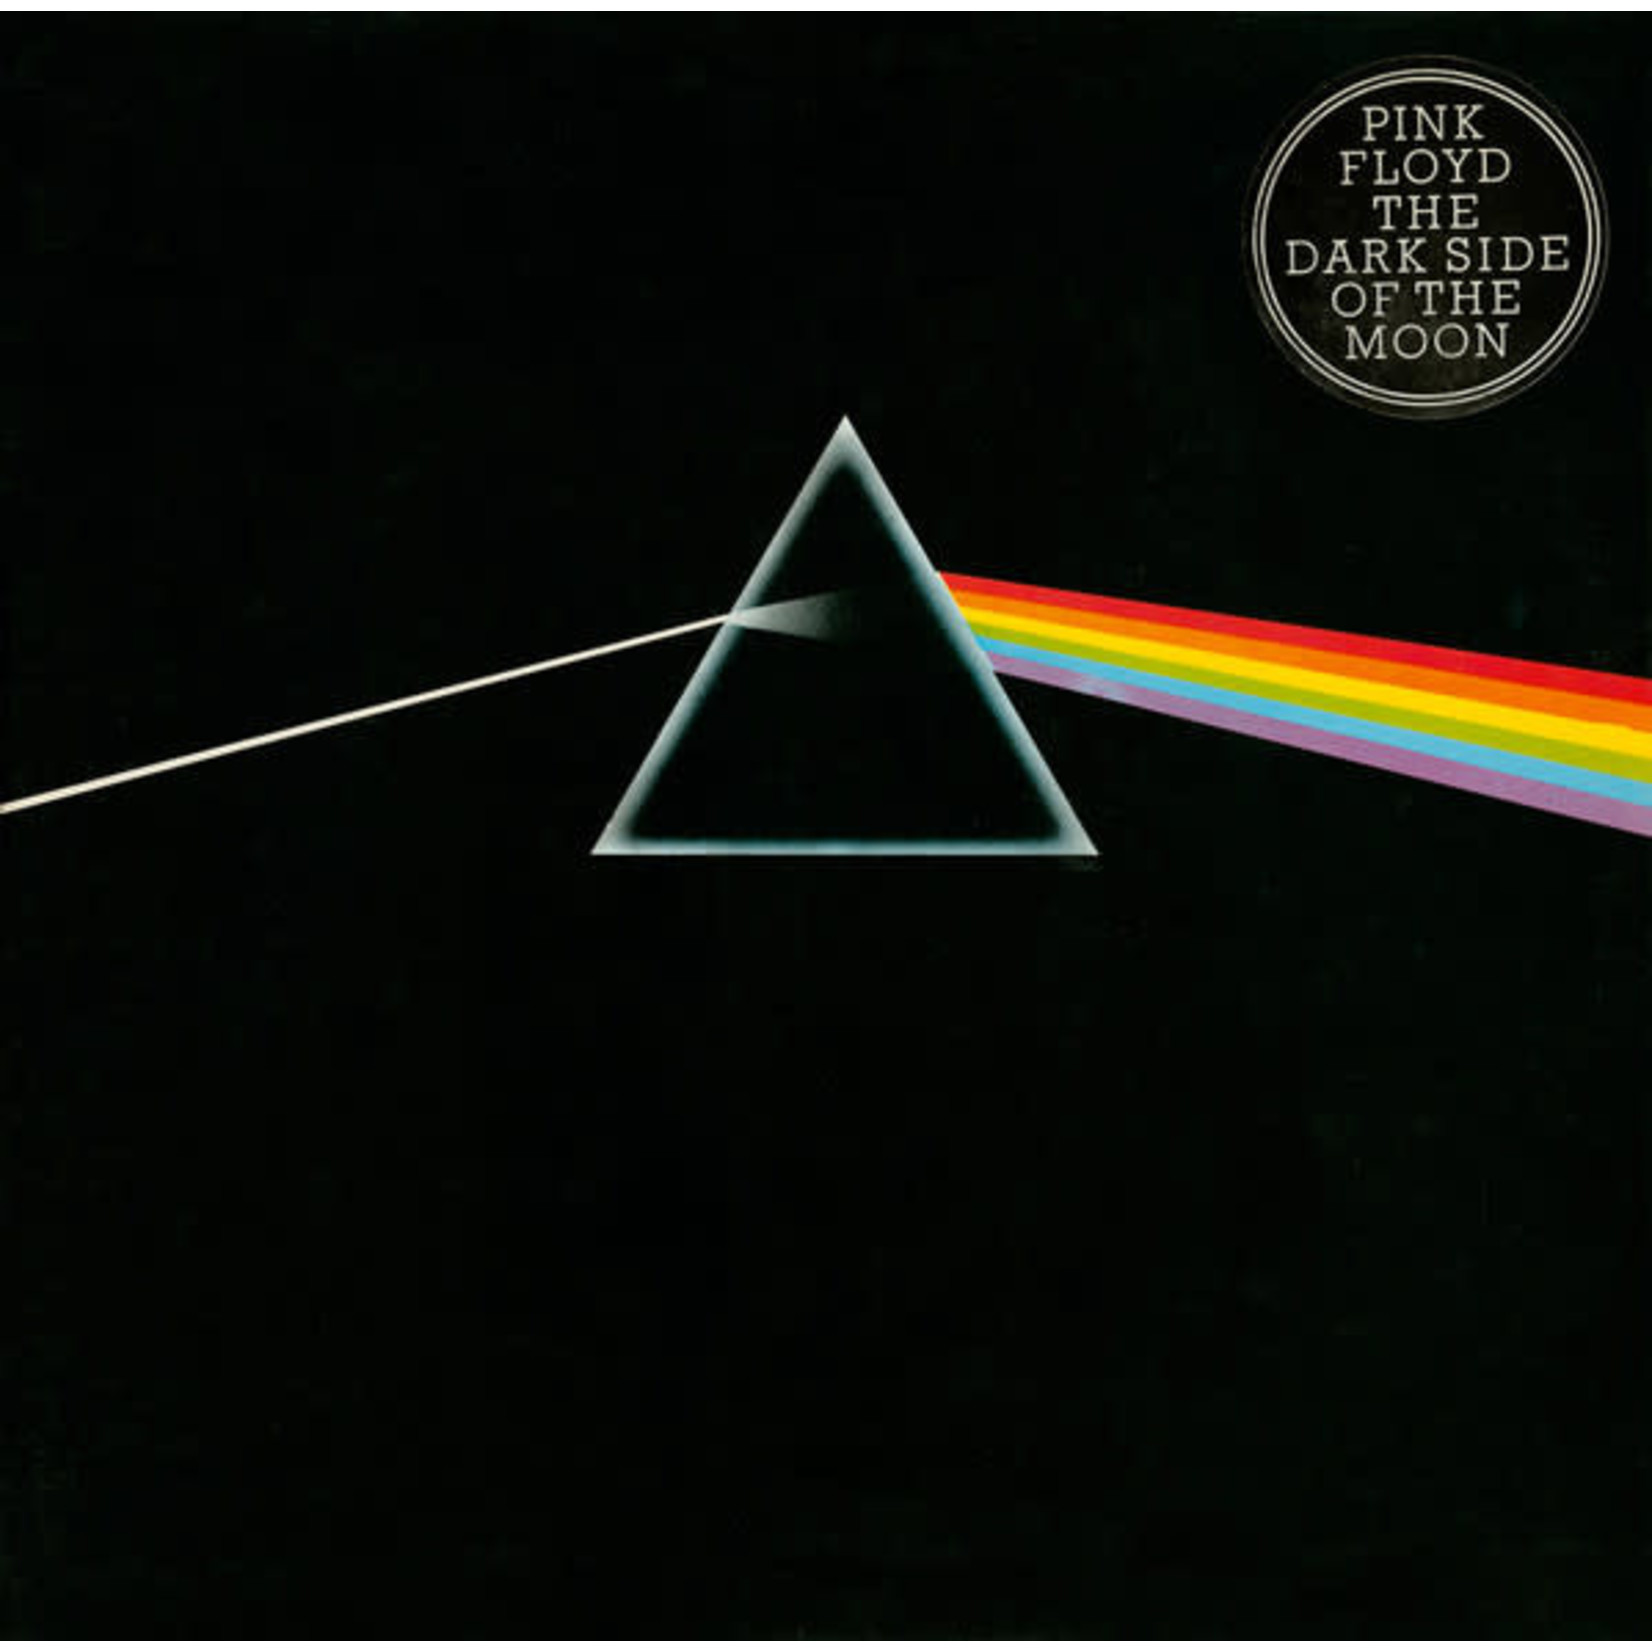 [New] Pink Floyd - Dark Side of the Moon (180g, remastered, UK import)